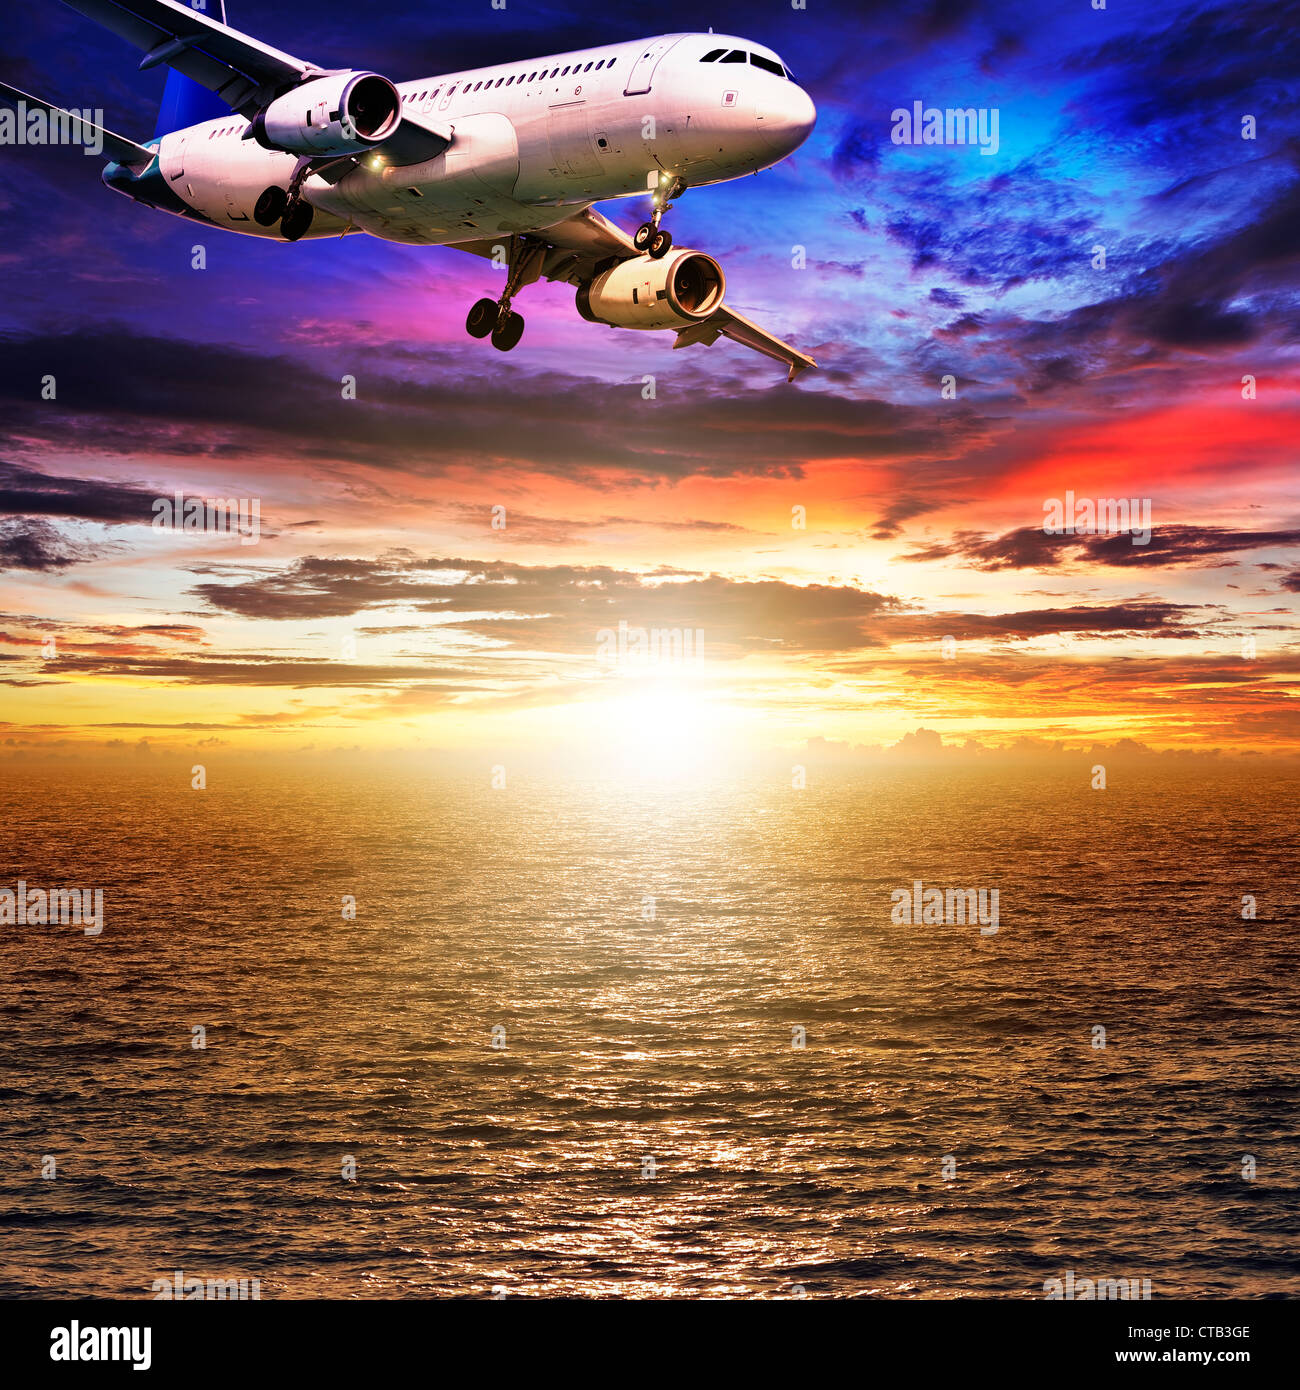 Jet plane over the sea at sunset time. Square composition. Stock Photo